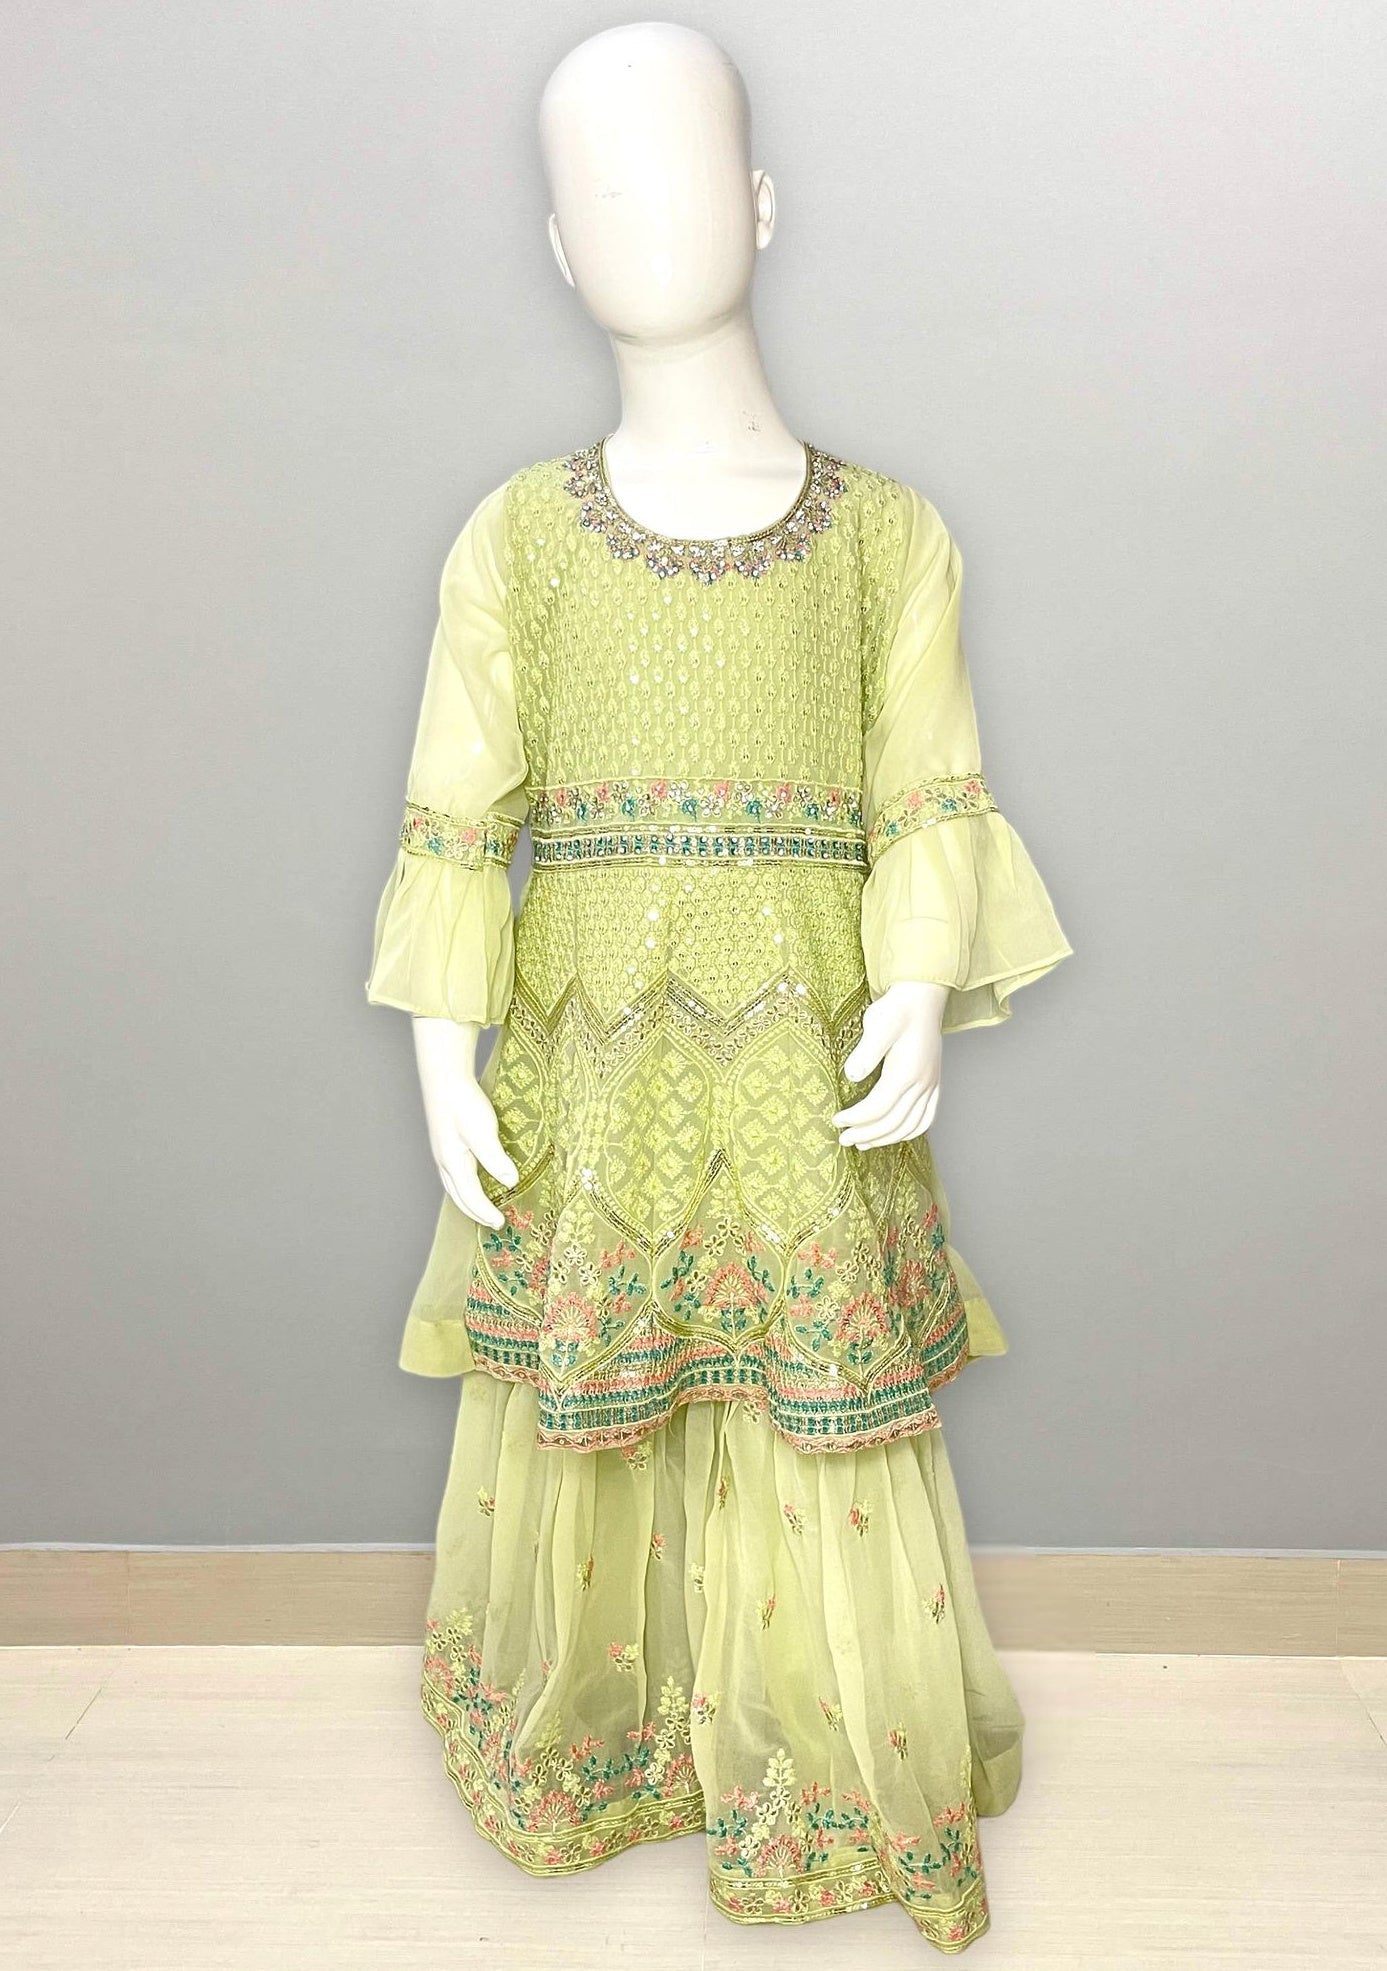 Girl's Gorgeous Georgette Sharara Suit - db21698